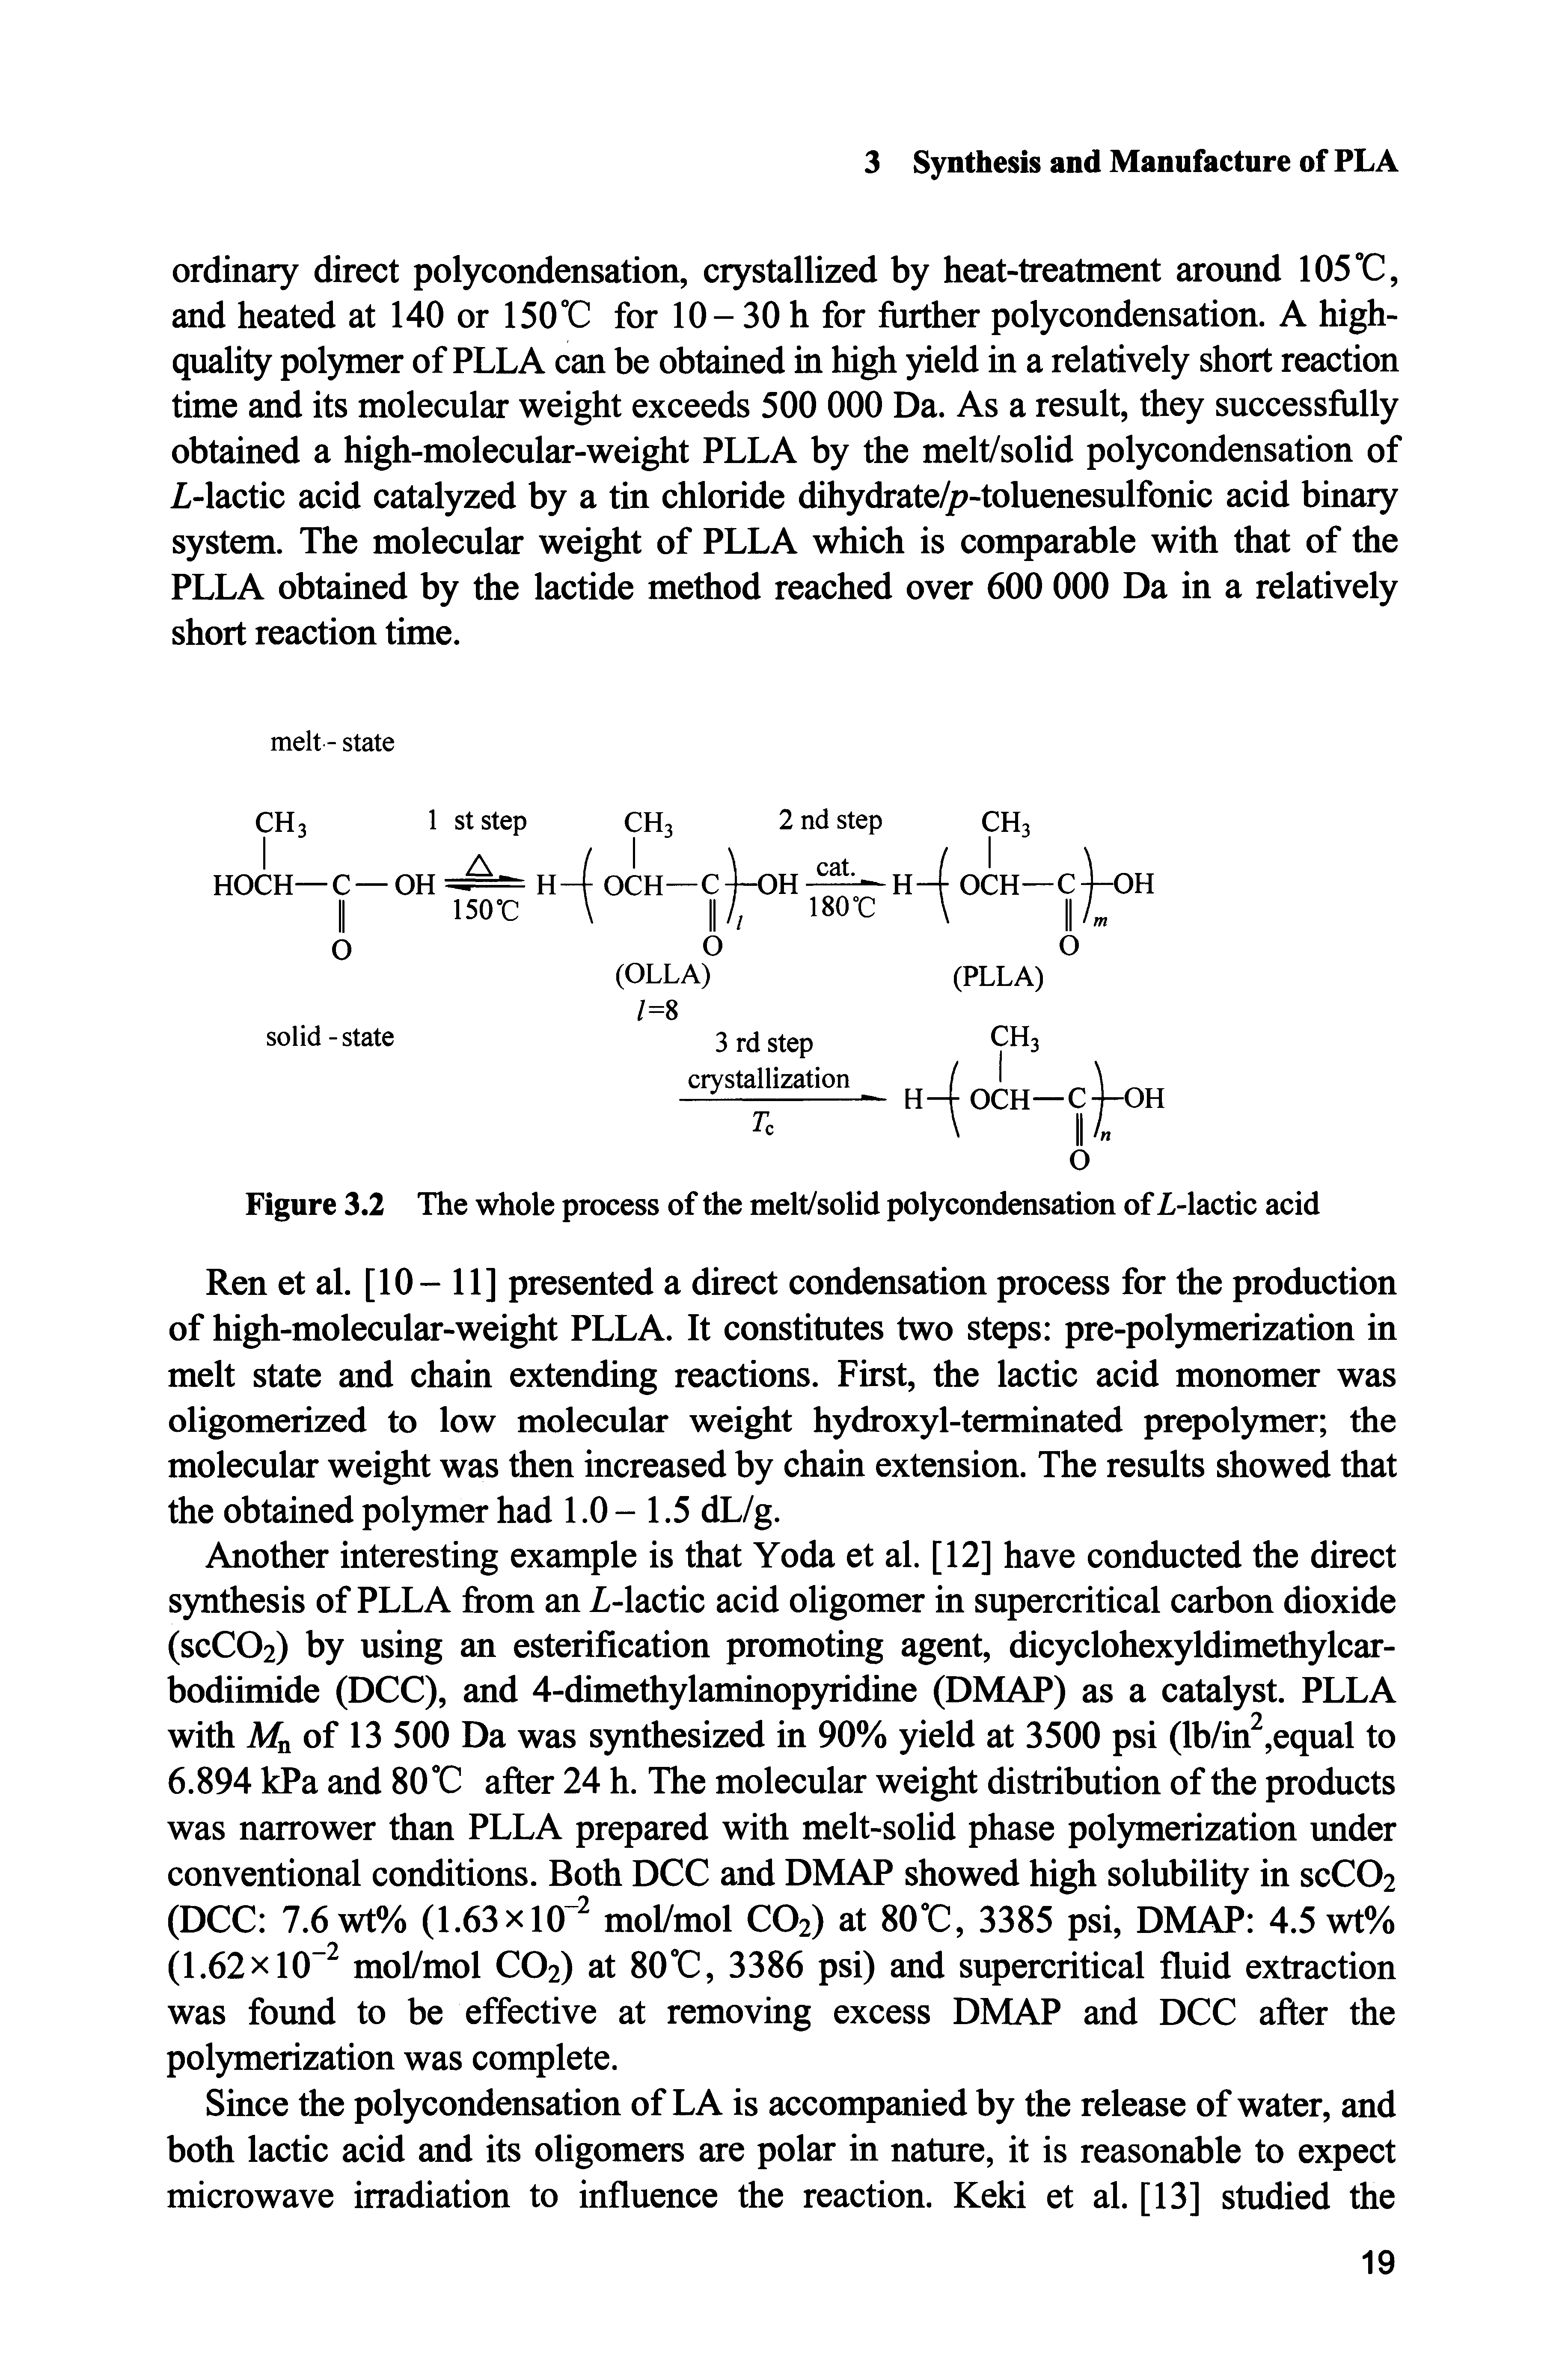 Figure 3.2 The whole process of the melt/solid polycondensation of L-lactic acid...